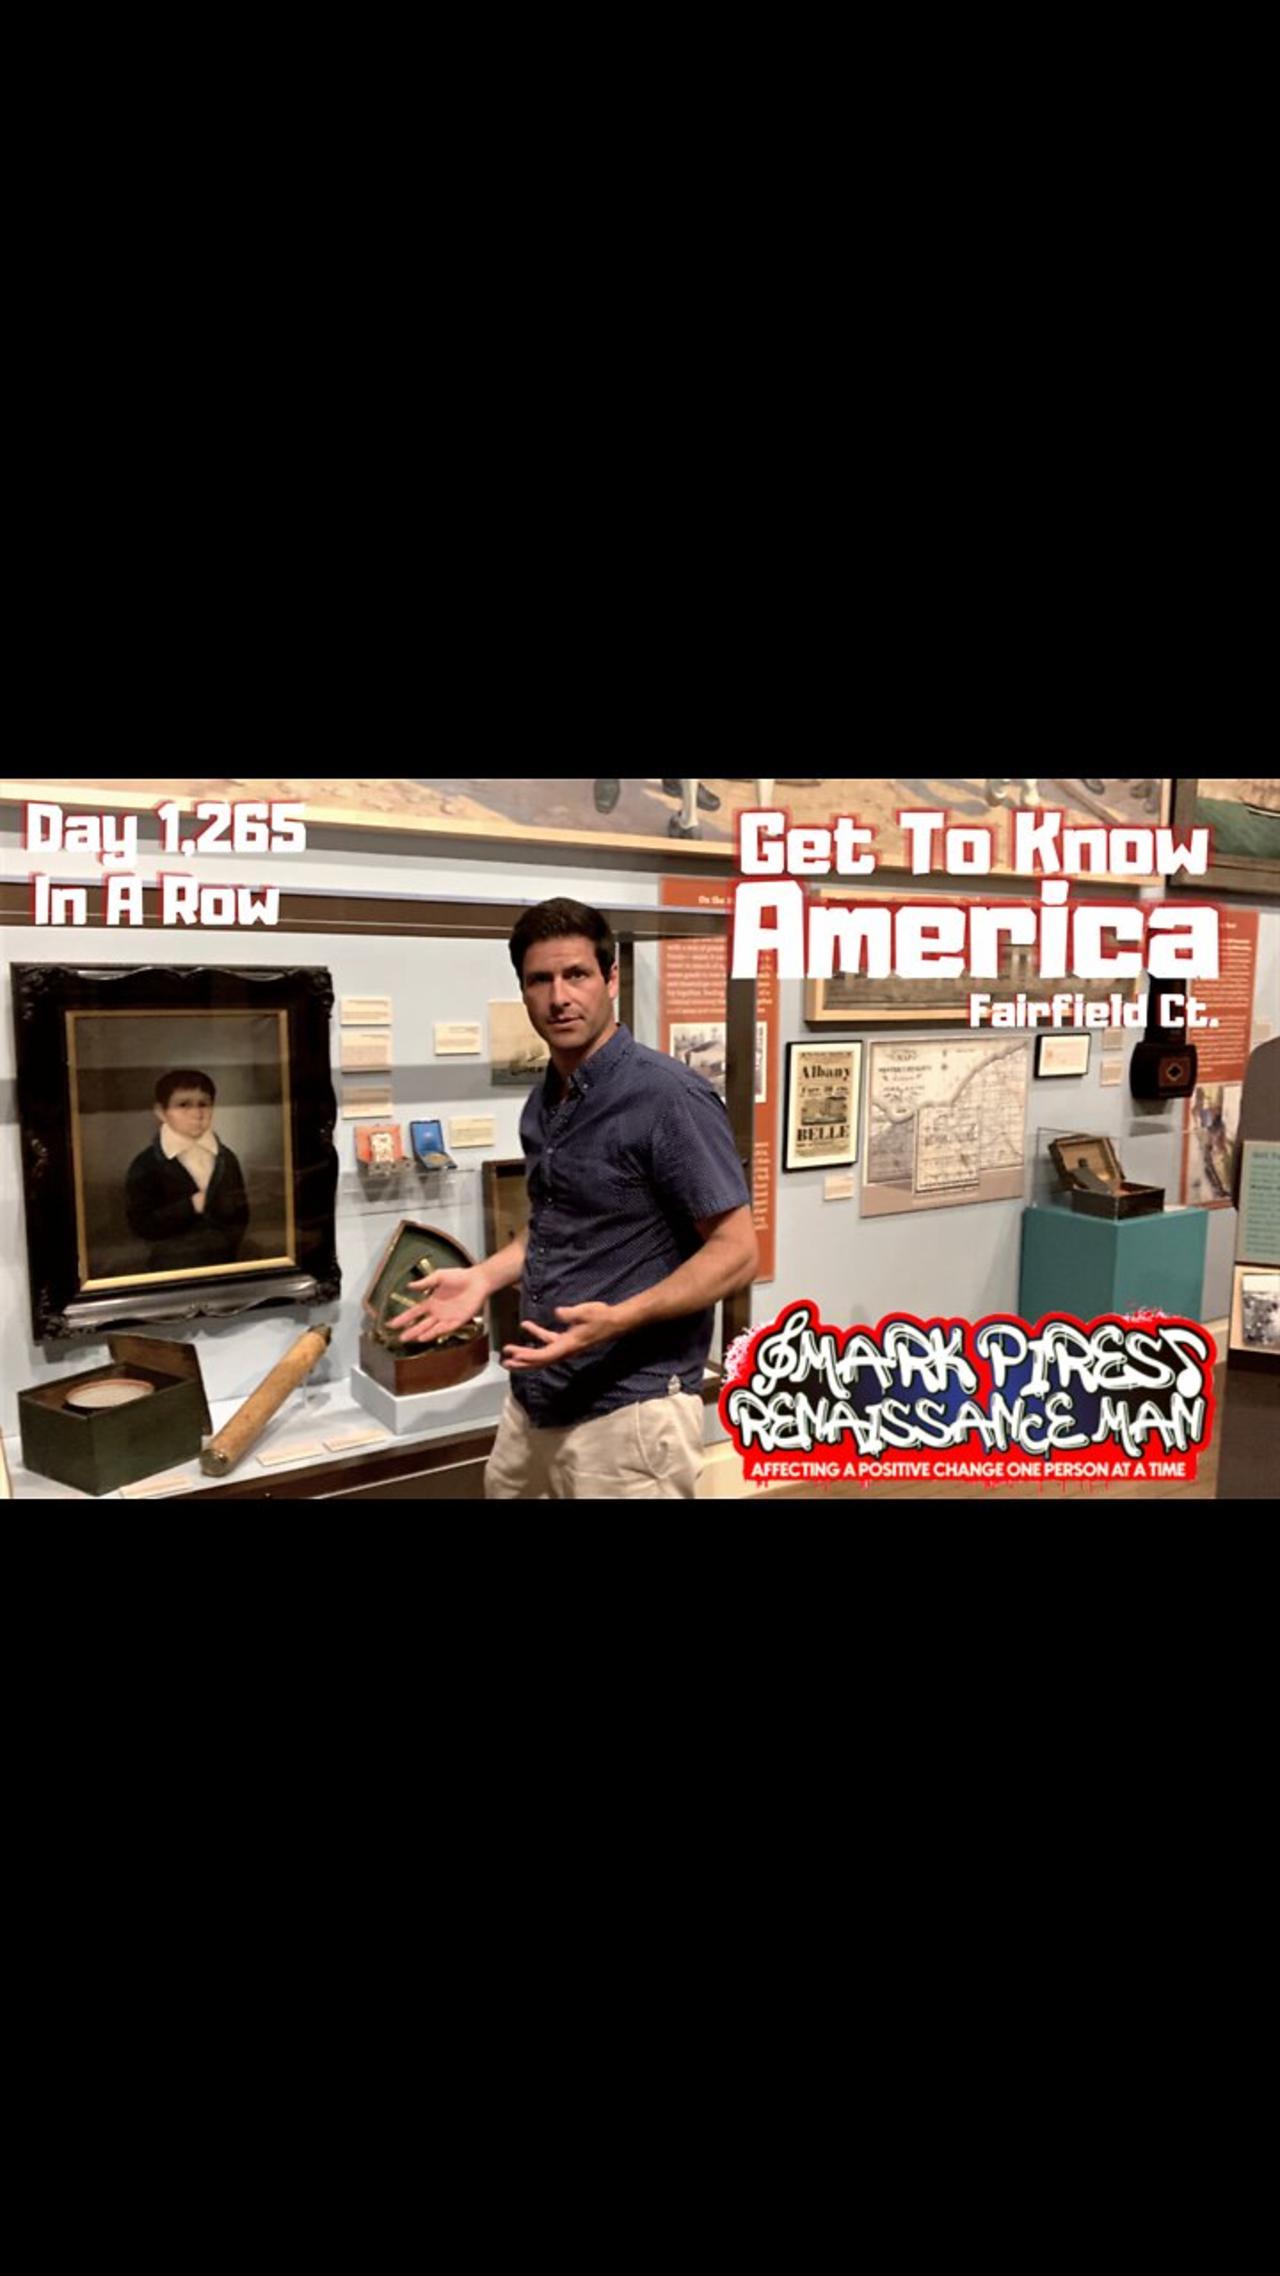 Tomorrow 8pm Get To Know America! Sub to The NEW Channel! It's SNL!!